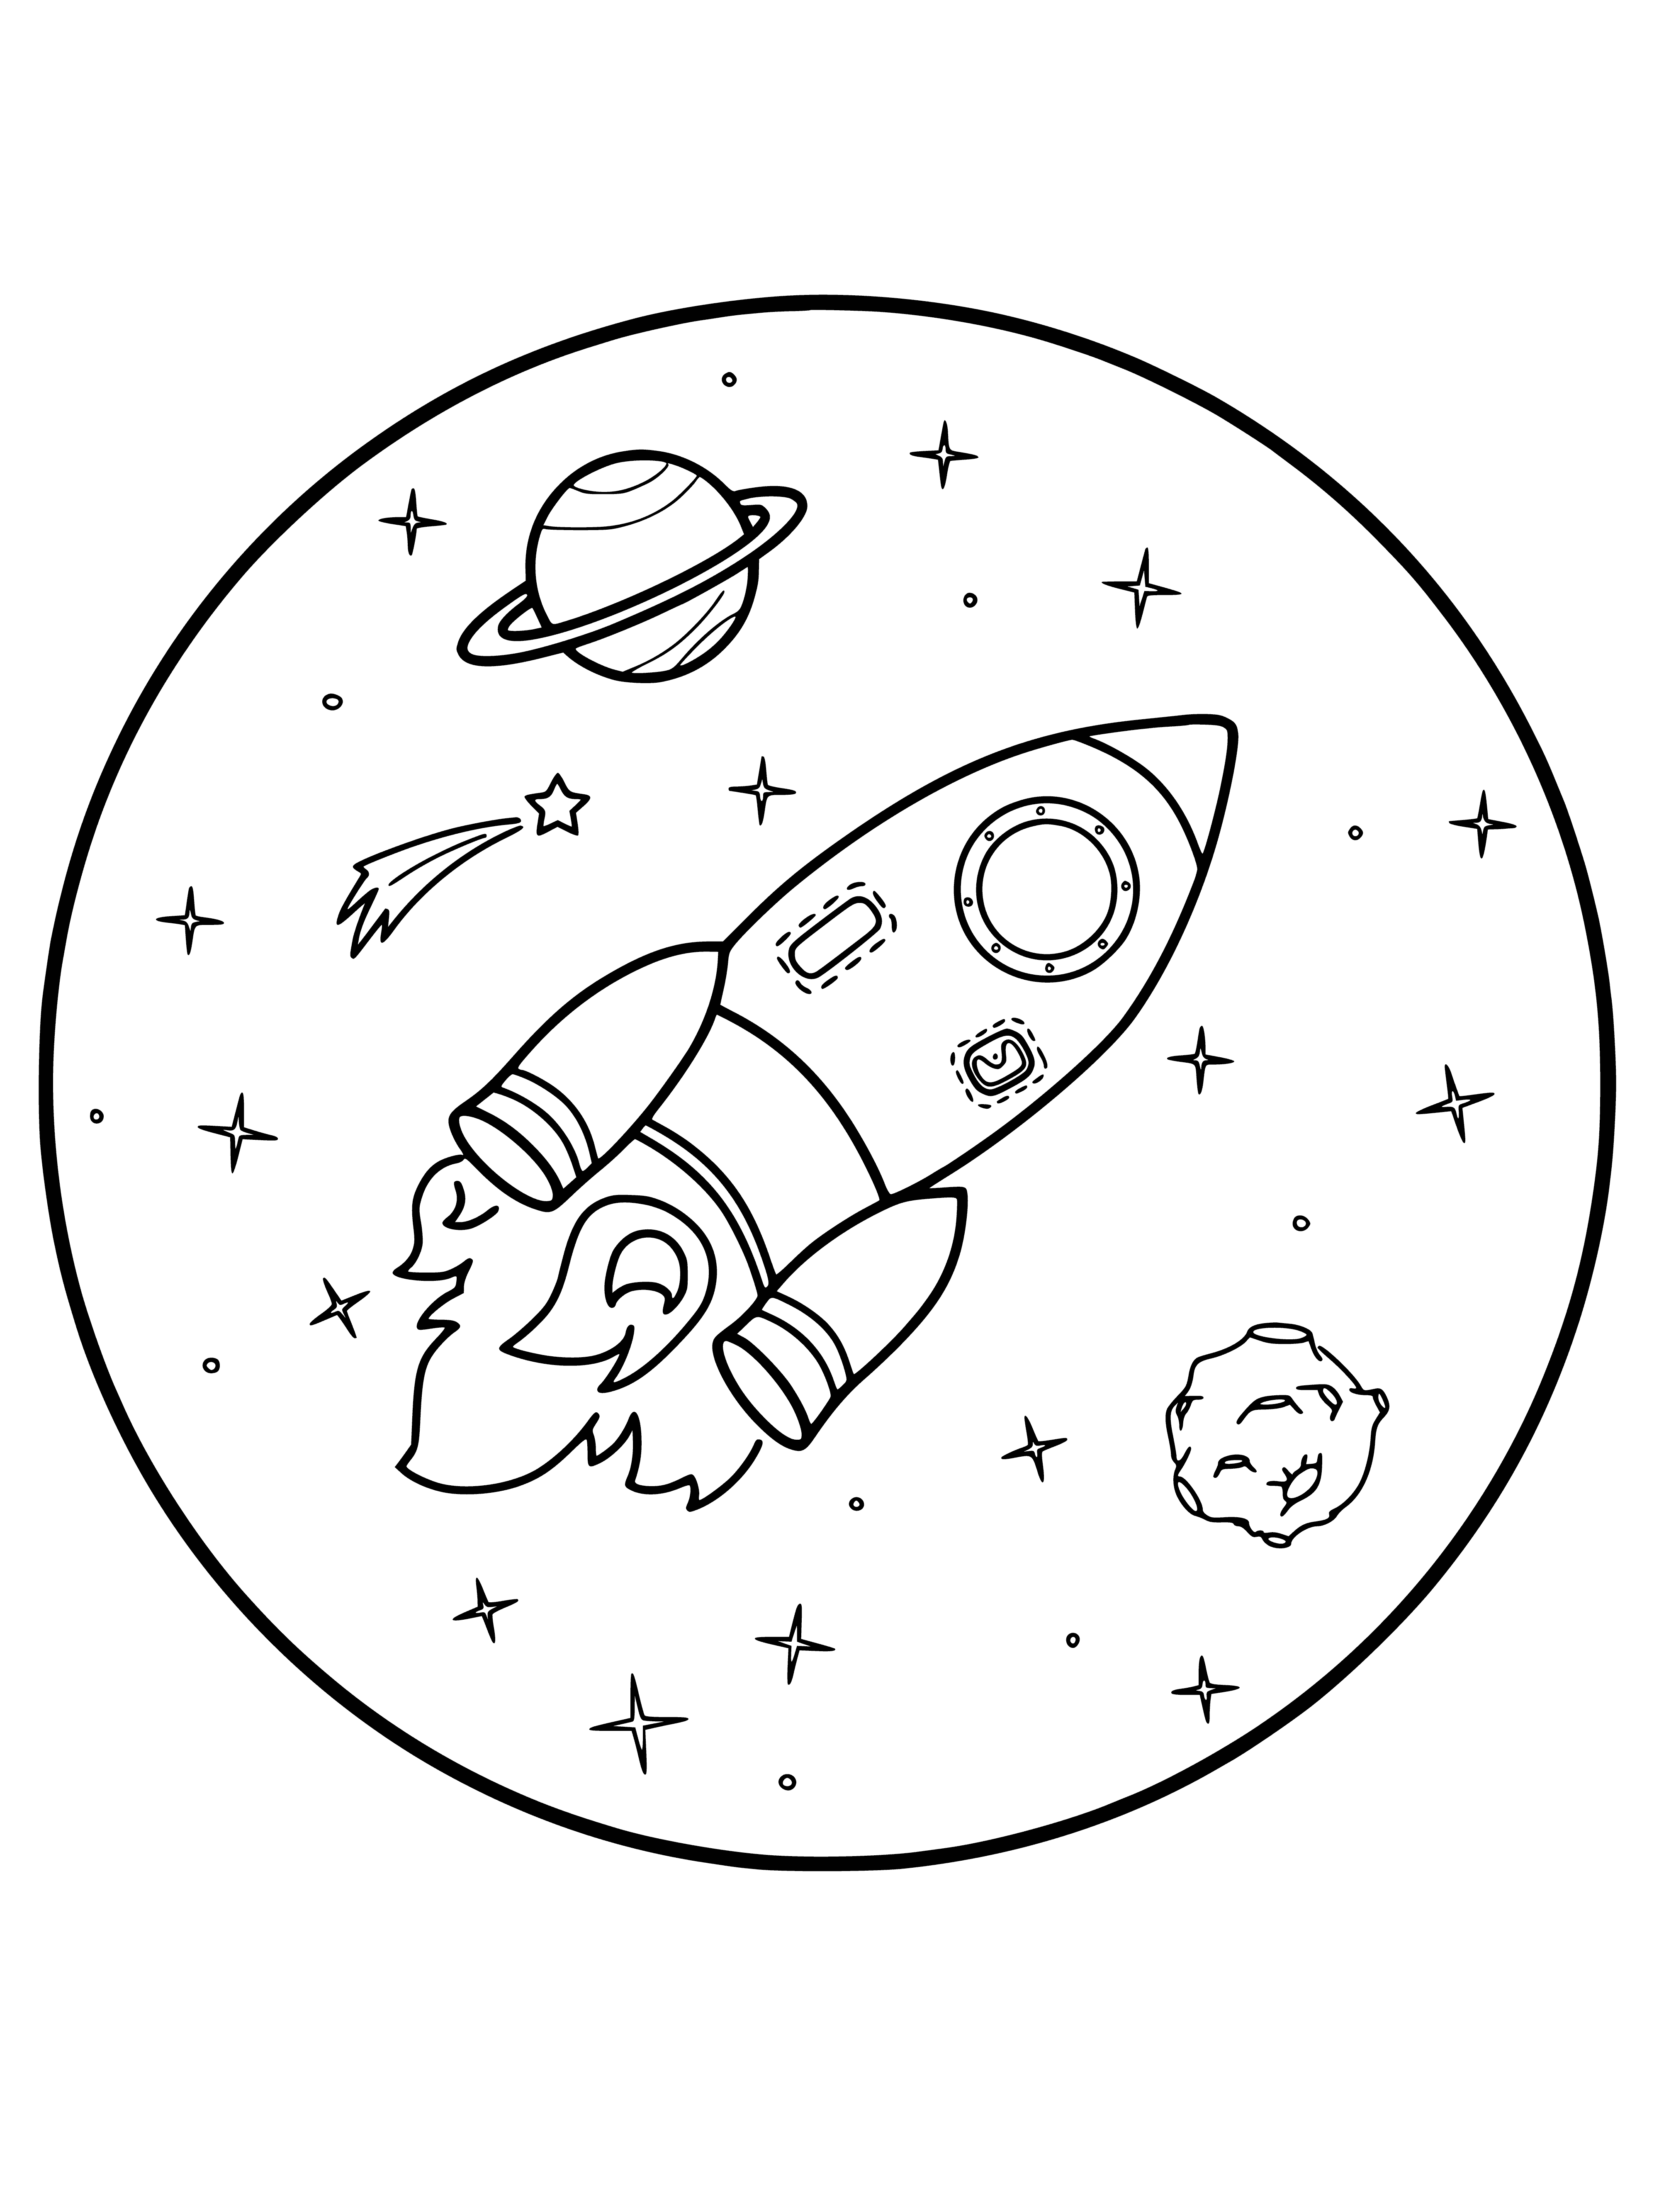 Space flight coloring page